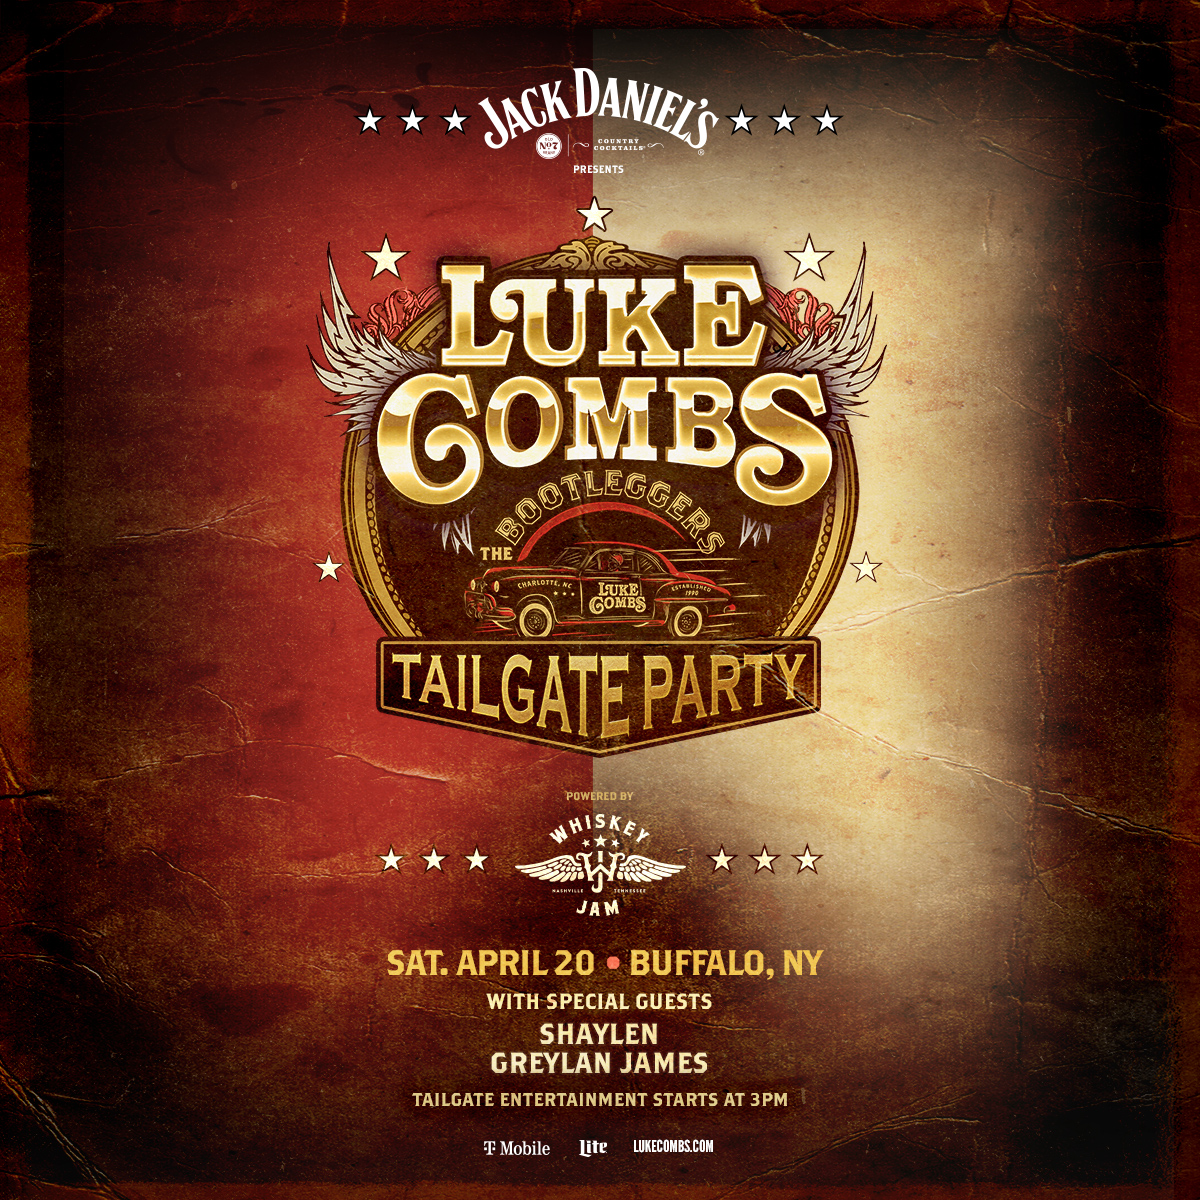 Join us at the Bootleggers Tailgate Party ahead of Luke Combs' show on April 20!